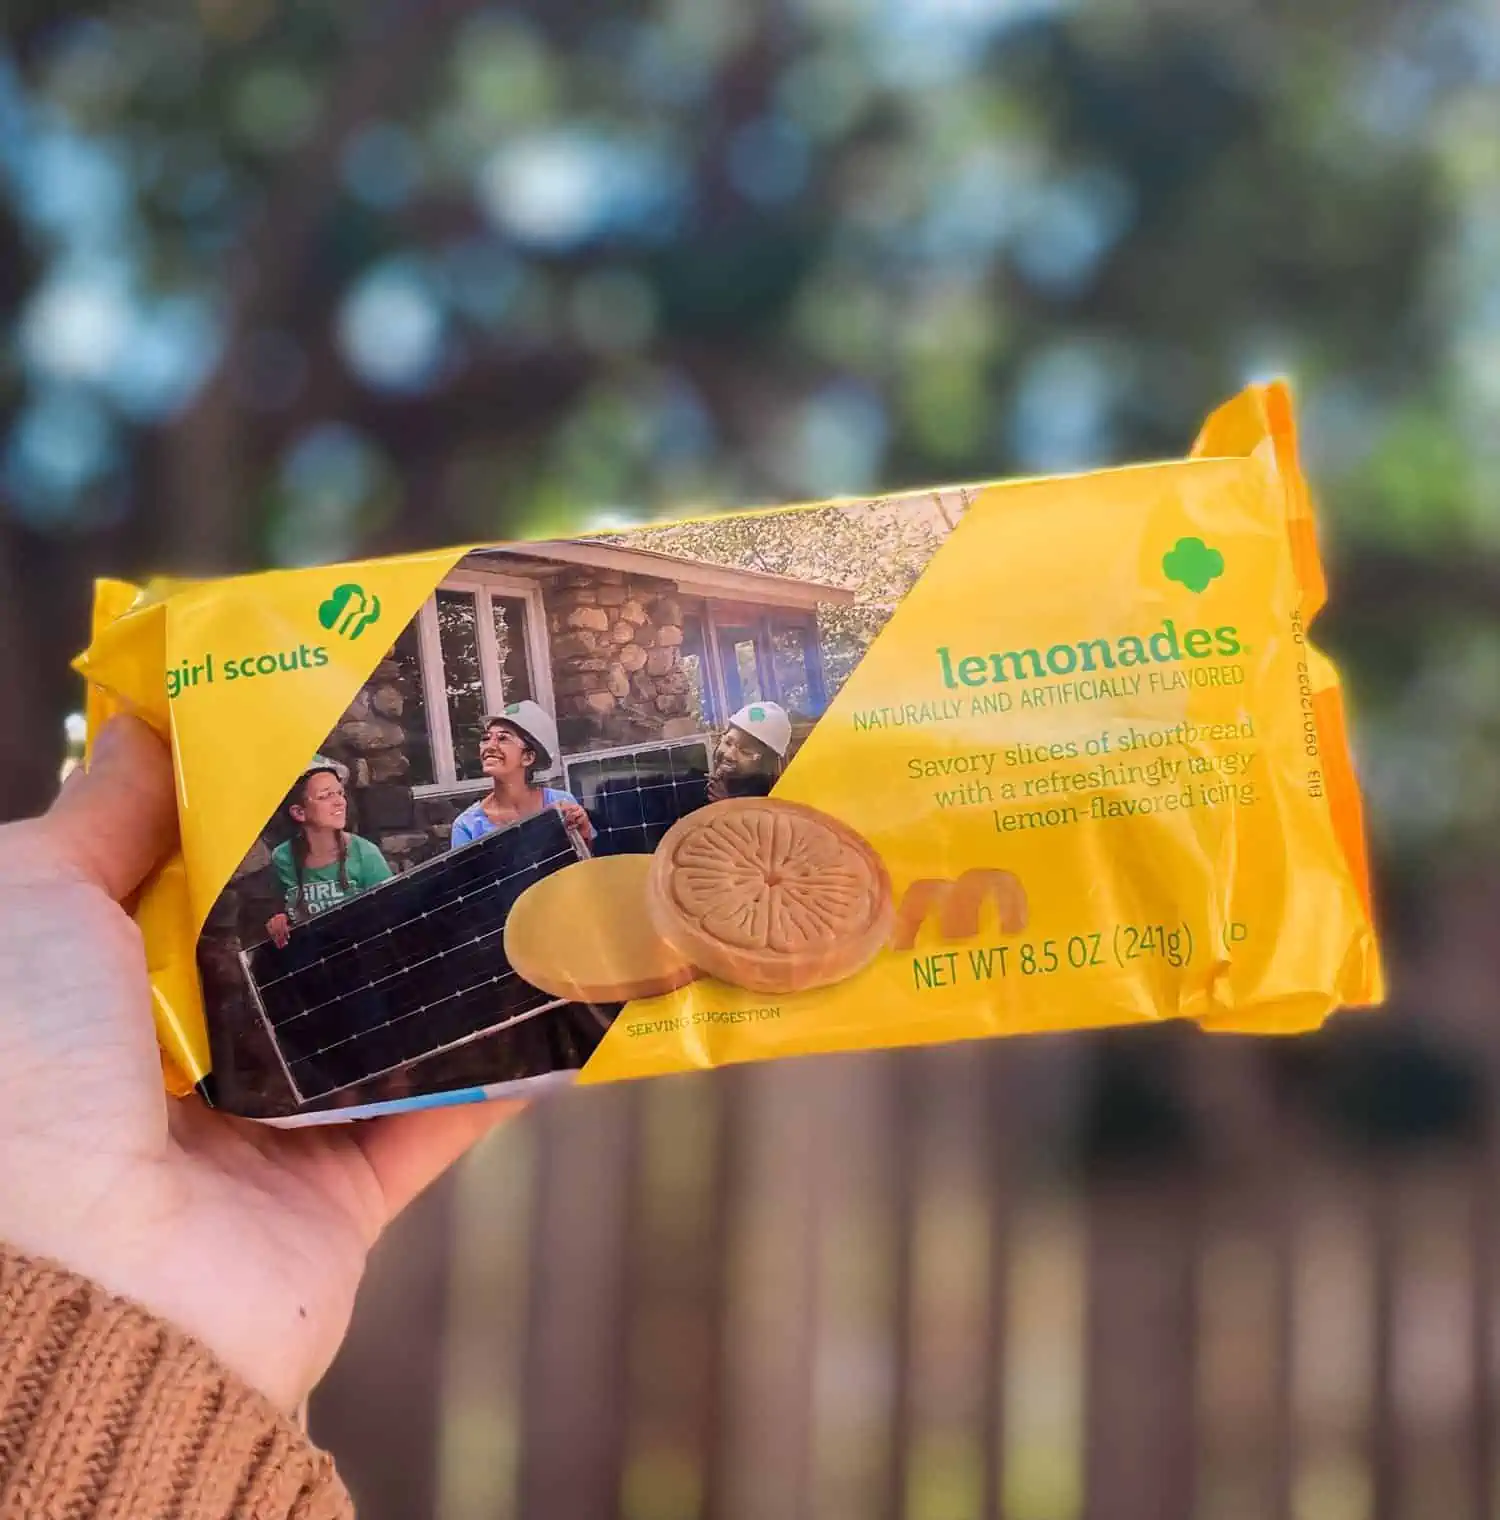 Hand holding a package of lemonades vegan girl scout cookies in a yellow bag